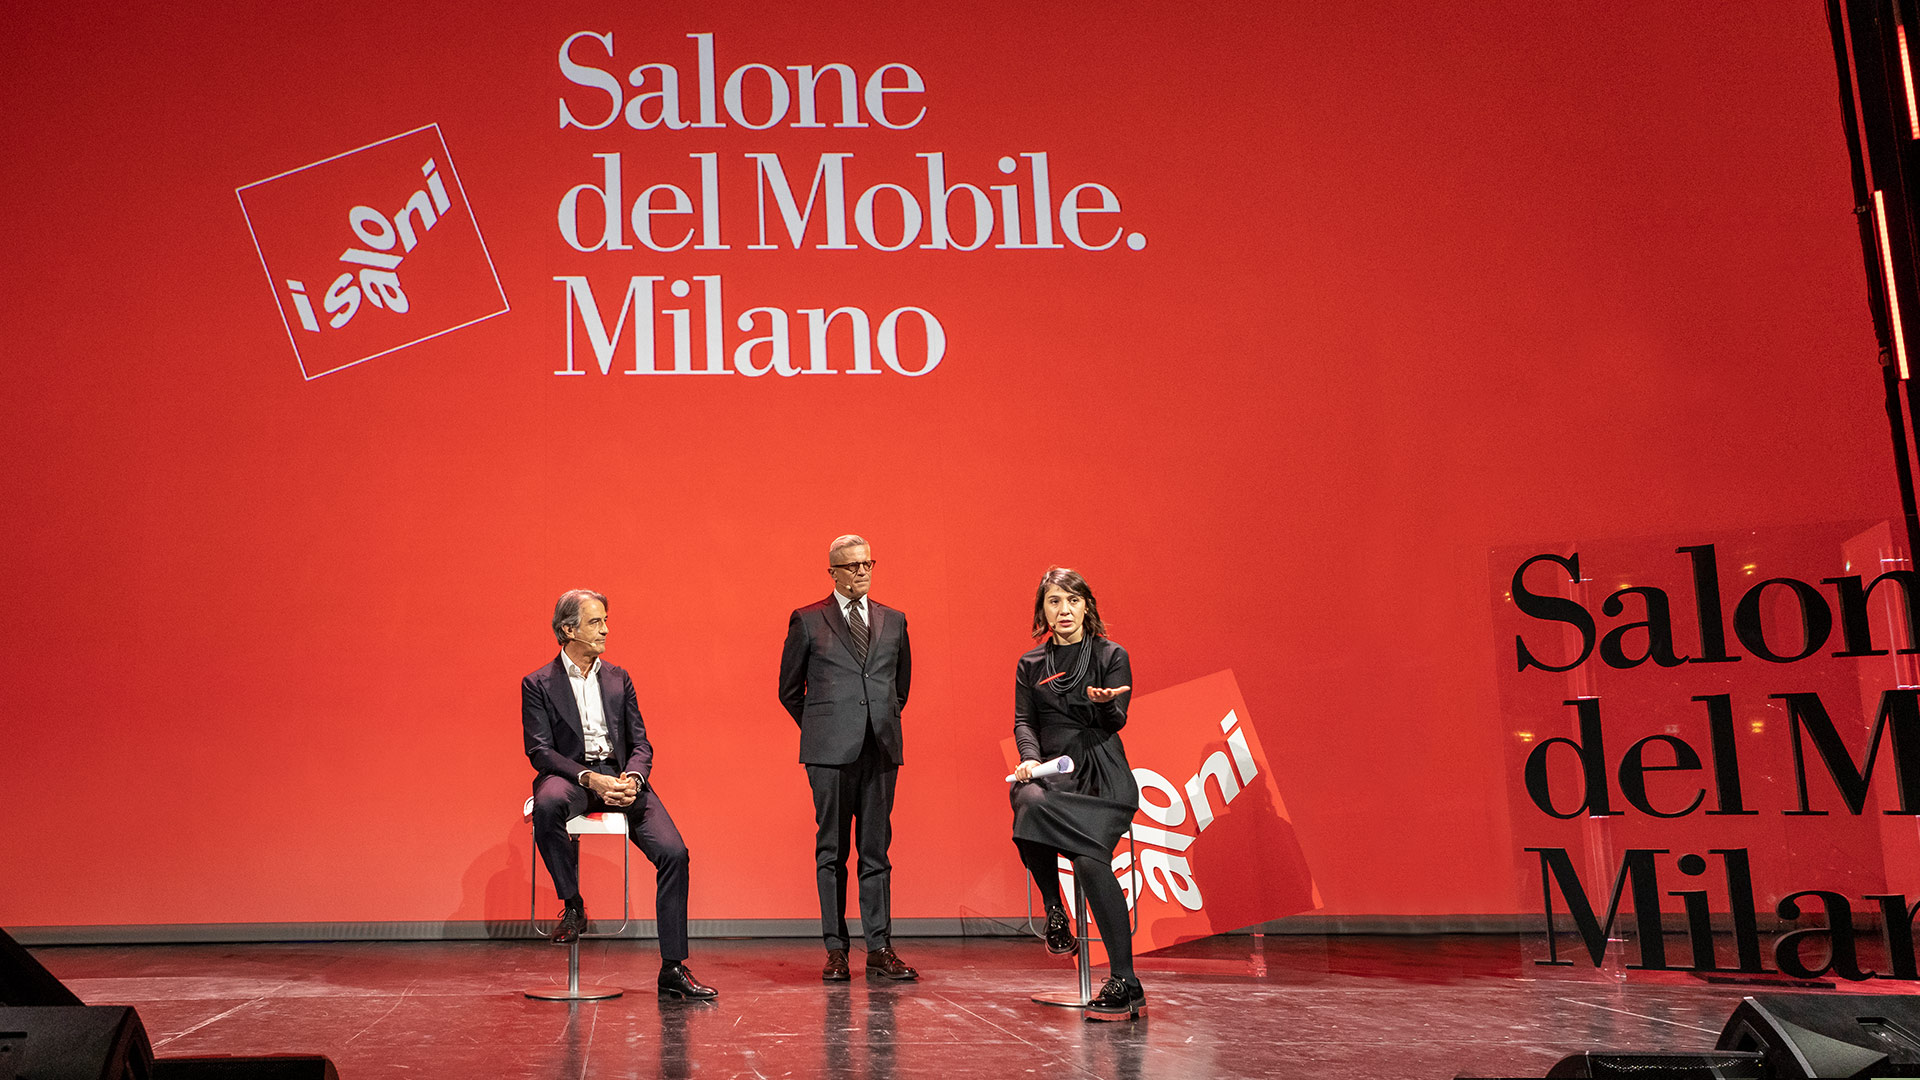 During the Salone Internazionale del Mobile, which will be held in